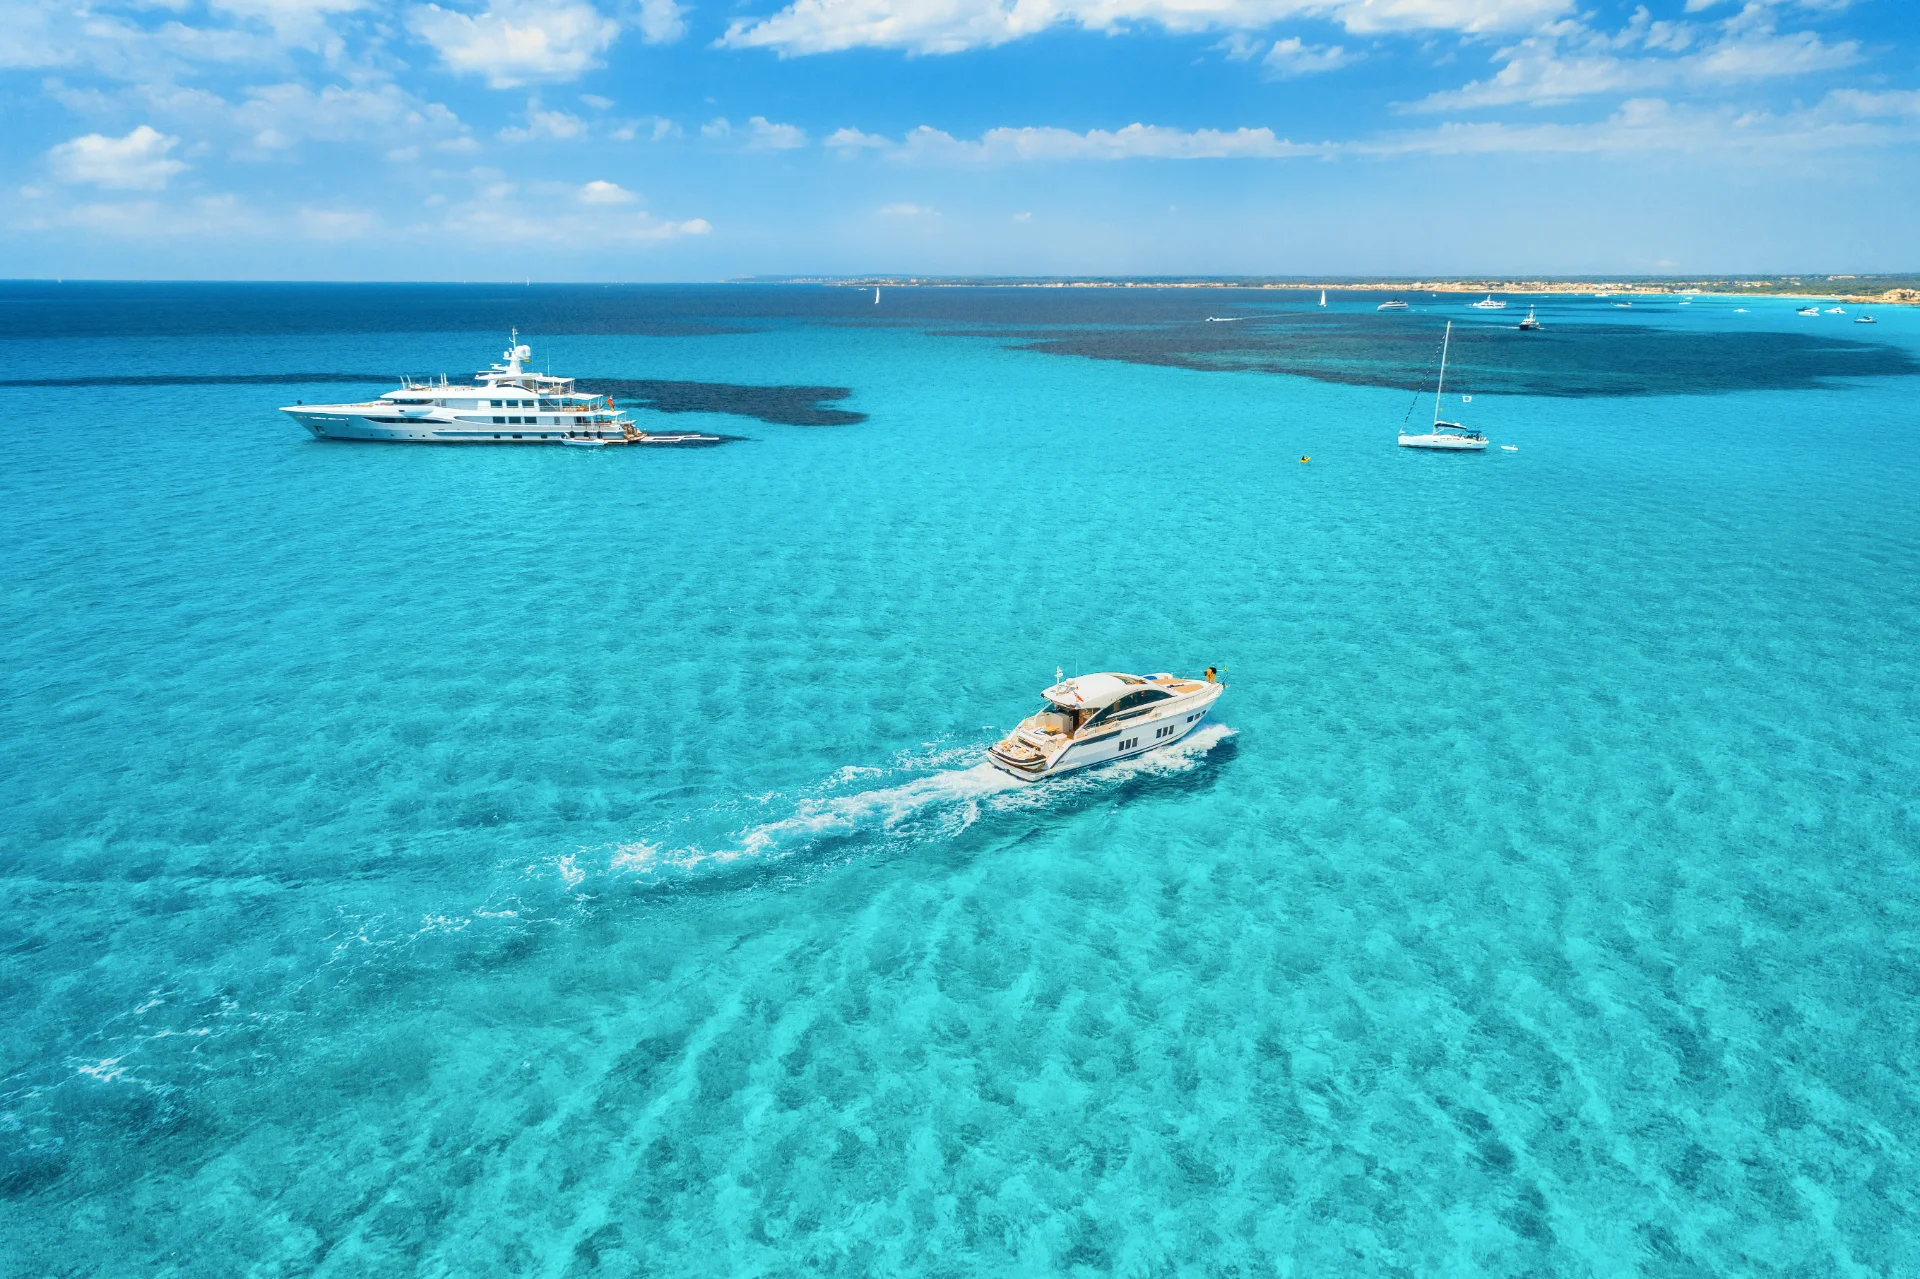 Aerial view of three yachts sailing through the crystal-clear turquoise waters of an ocean. The sky above is filled with scattered white clouds, and the horizon shows a strip of sandy shoreline with a few scattered buildings in the distance.